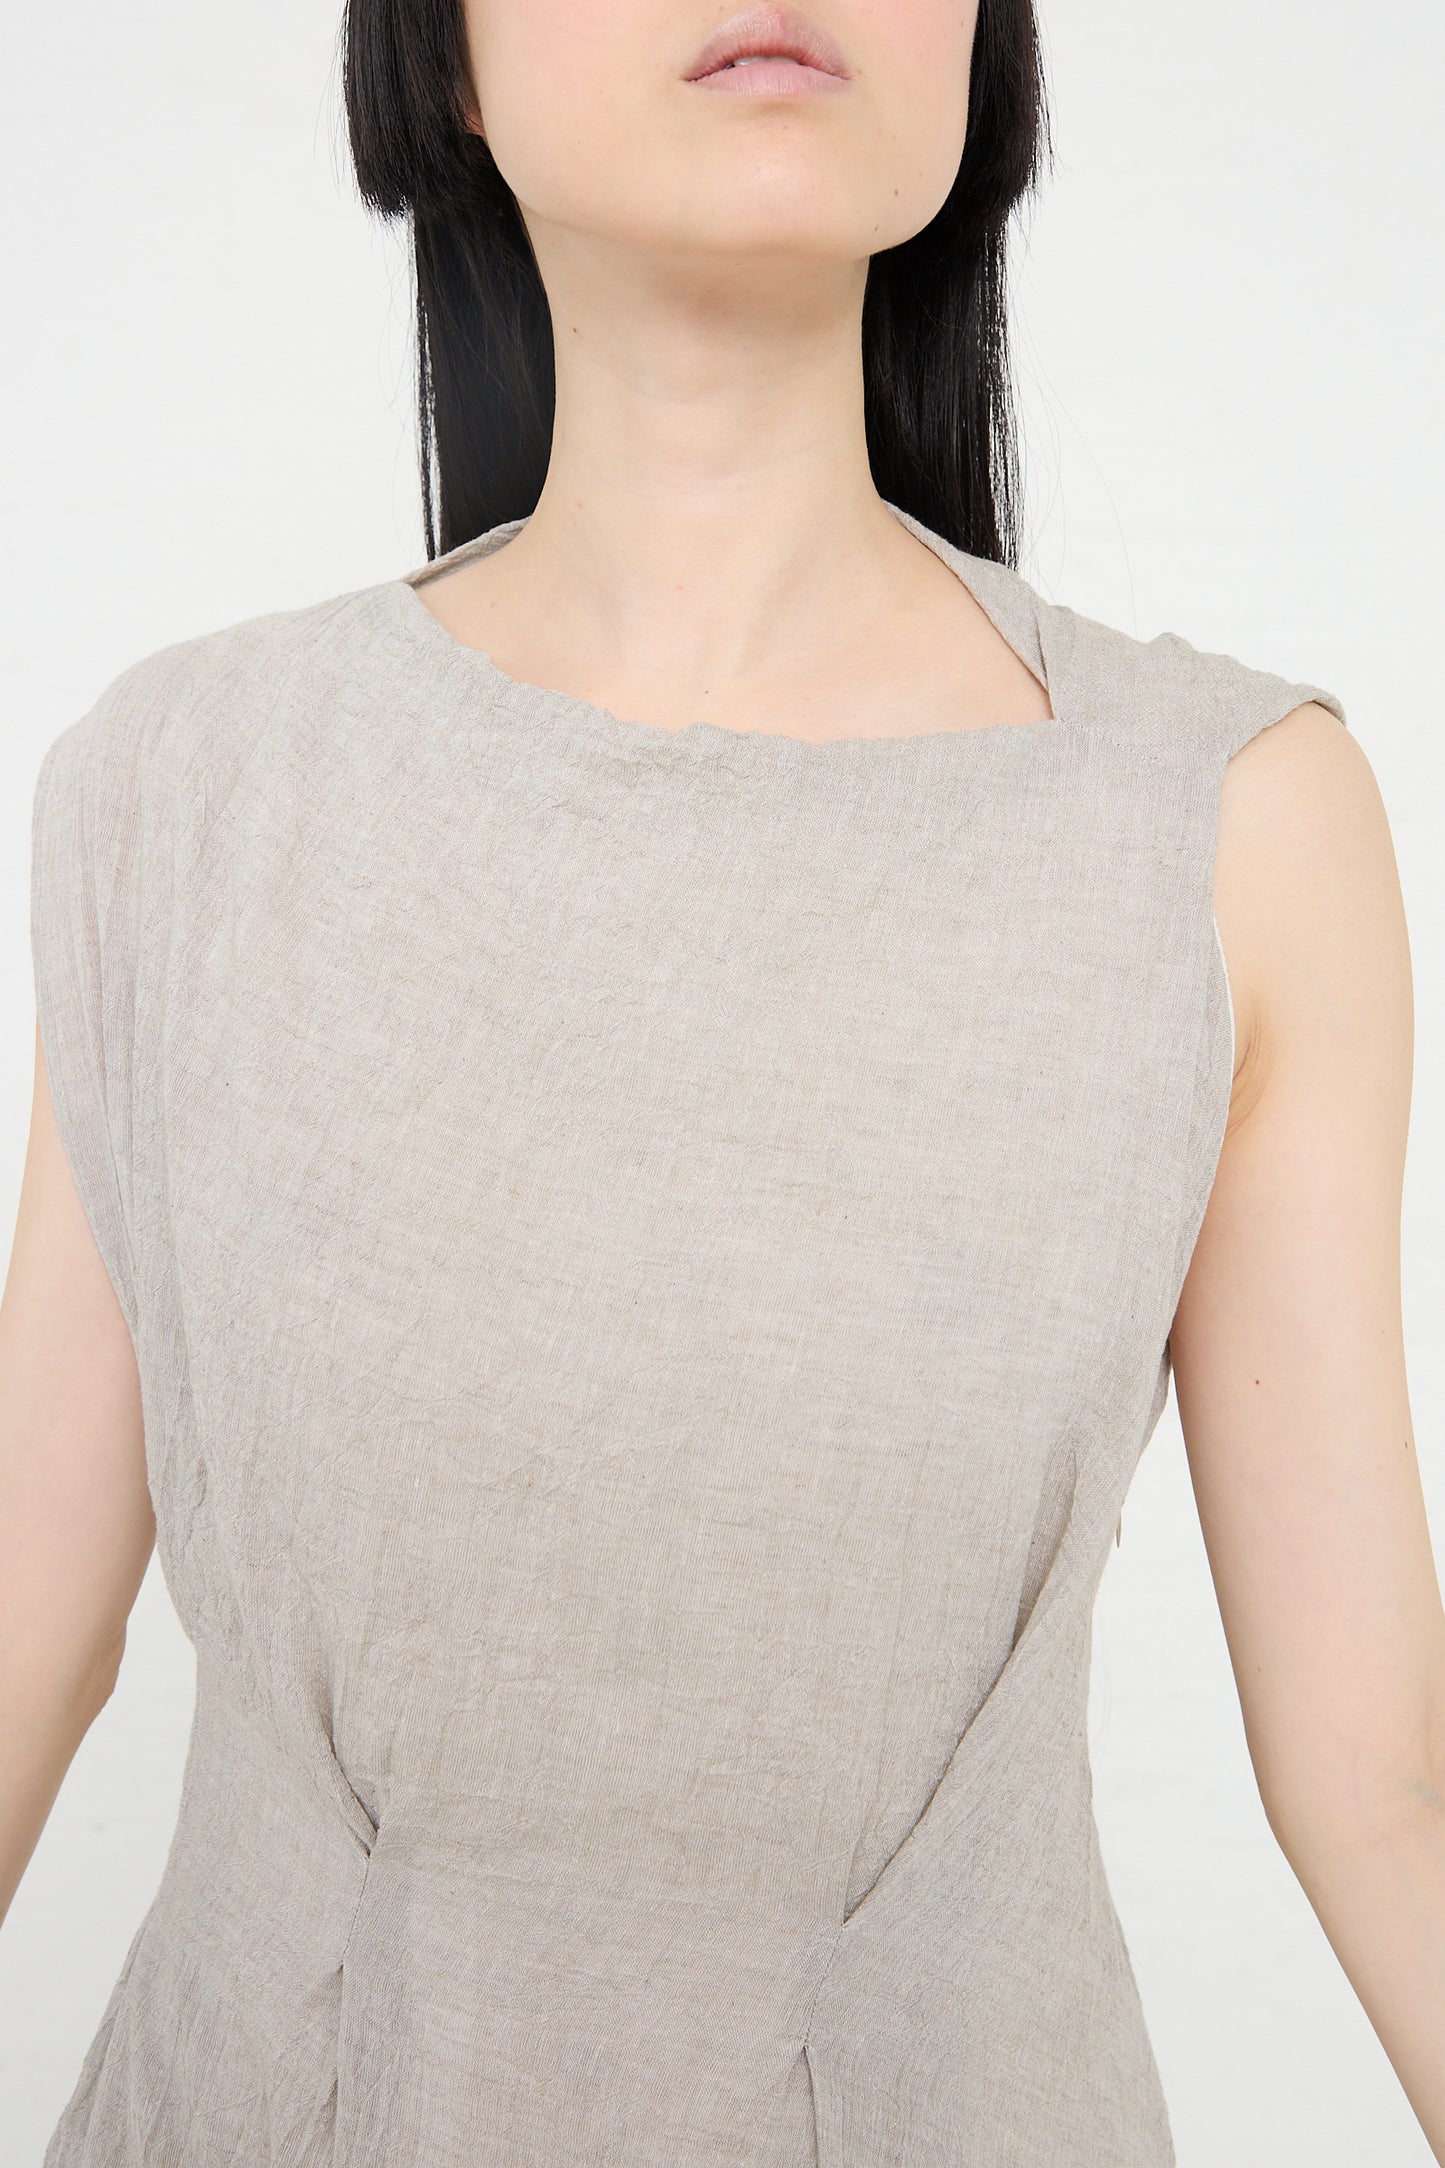 Close-up of a woman in a Lauren Manoogian Gauze Twist Dress in Ash, focusing on the garment's texture and neckline, with her face partially visible.